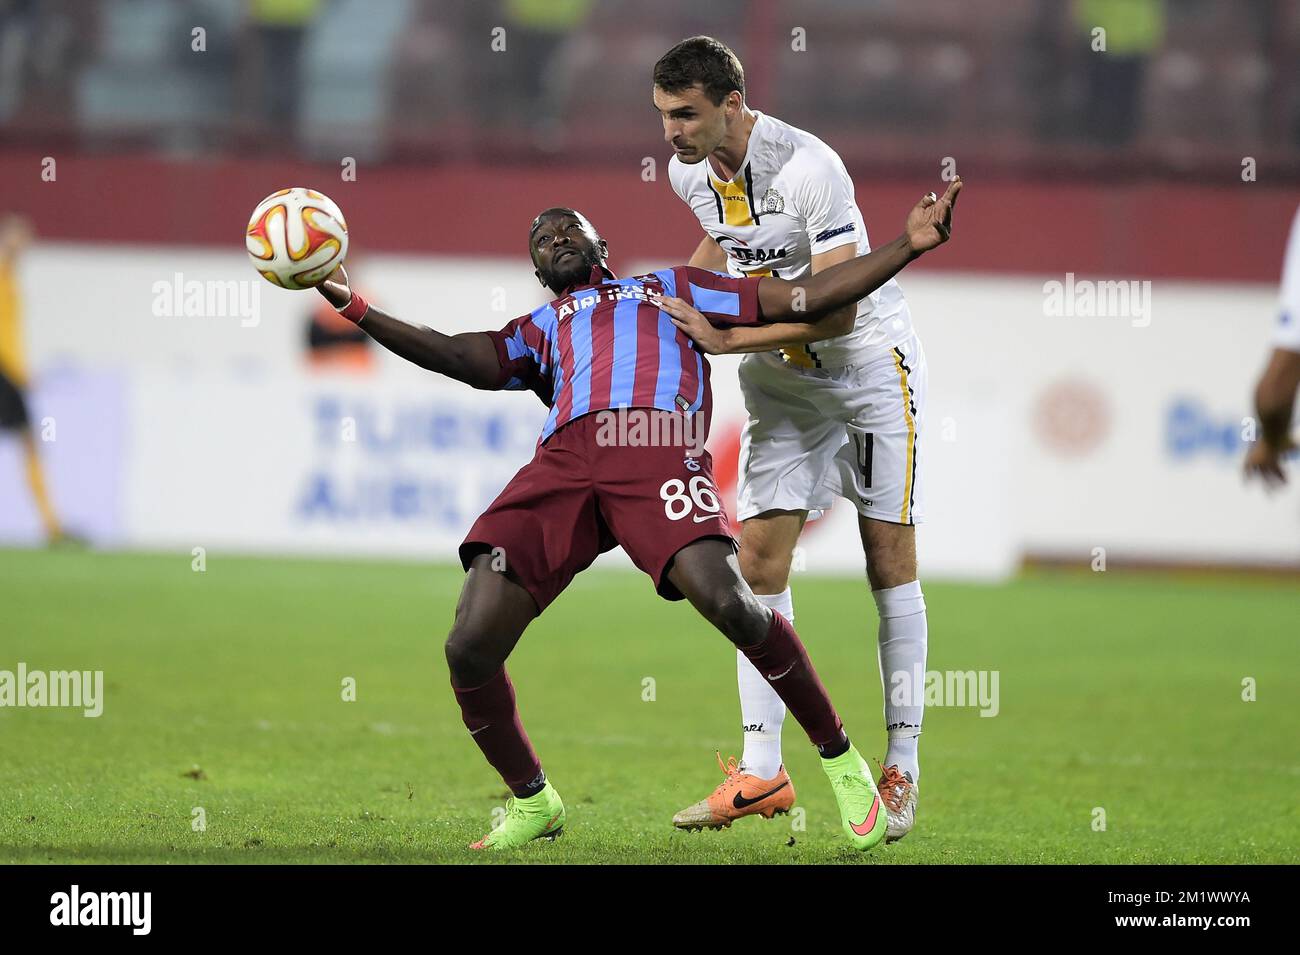 20141023 - TRABZON, TURKEY: Trabzonspor's Mustapha Yatabare and Lokeren's Gregory Mertens fight for the ball during a game between Turkish club Trabzonspor AS and Belgian soccer team KSC Lokeren OVL in the Huseyin Avni Aker Stadium in Trabzon, Thursday 23 October 2014. It is the third day of the group stage of the UEFA Europa League competition, in group L. BELGA PHOTO YORICK JANSENS Stock Photo